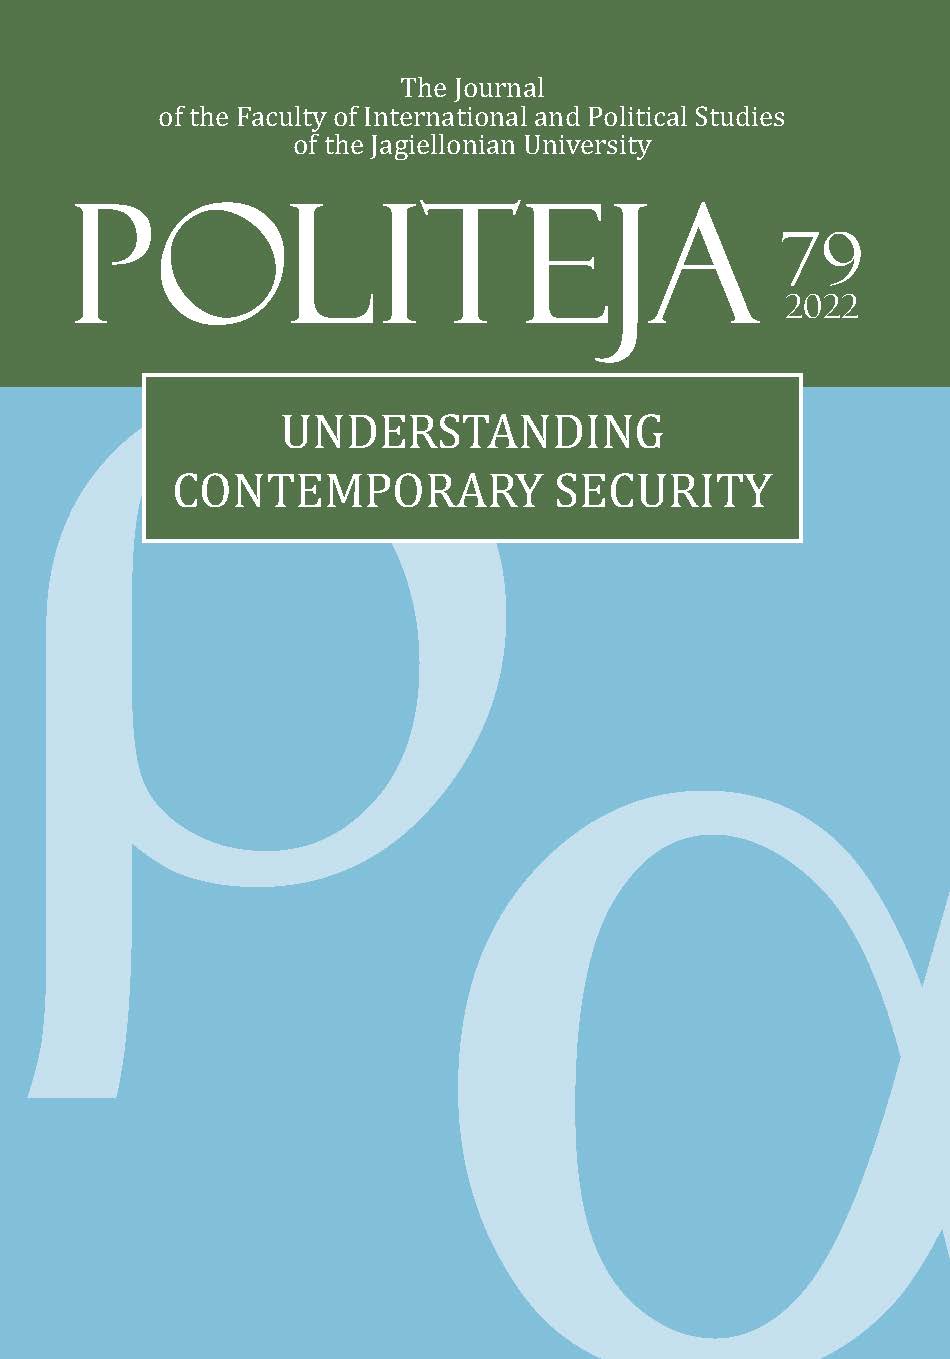 Understanding Contemporary Security: A Prolegomenon to the Interplay Between Technology, Innovation and Policy Responses